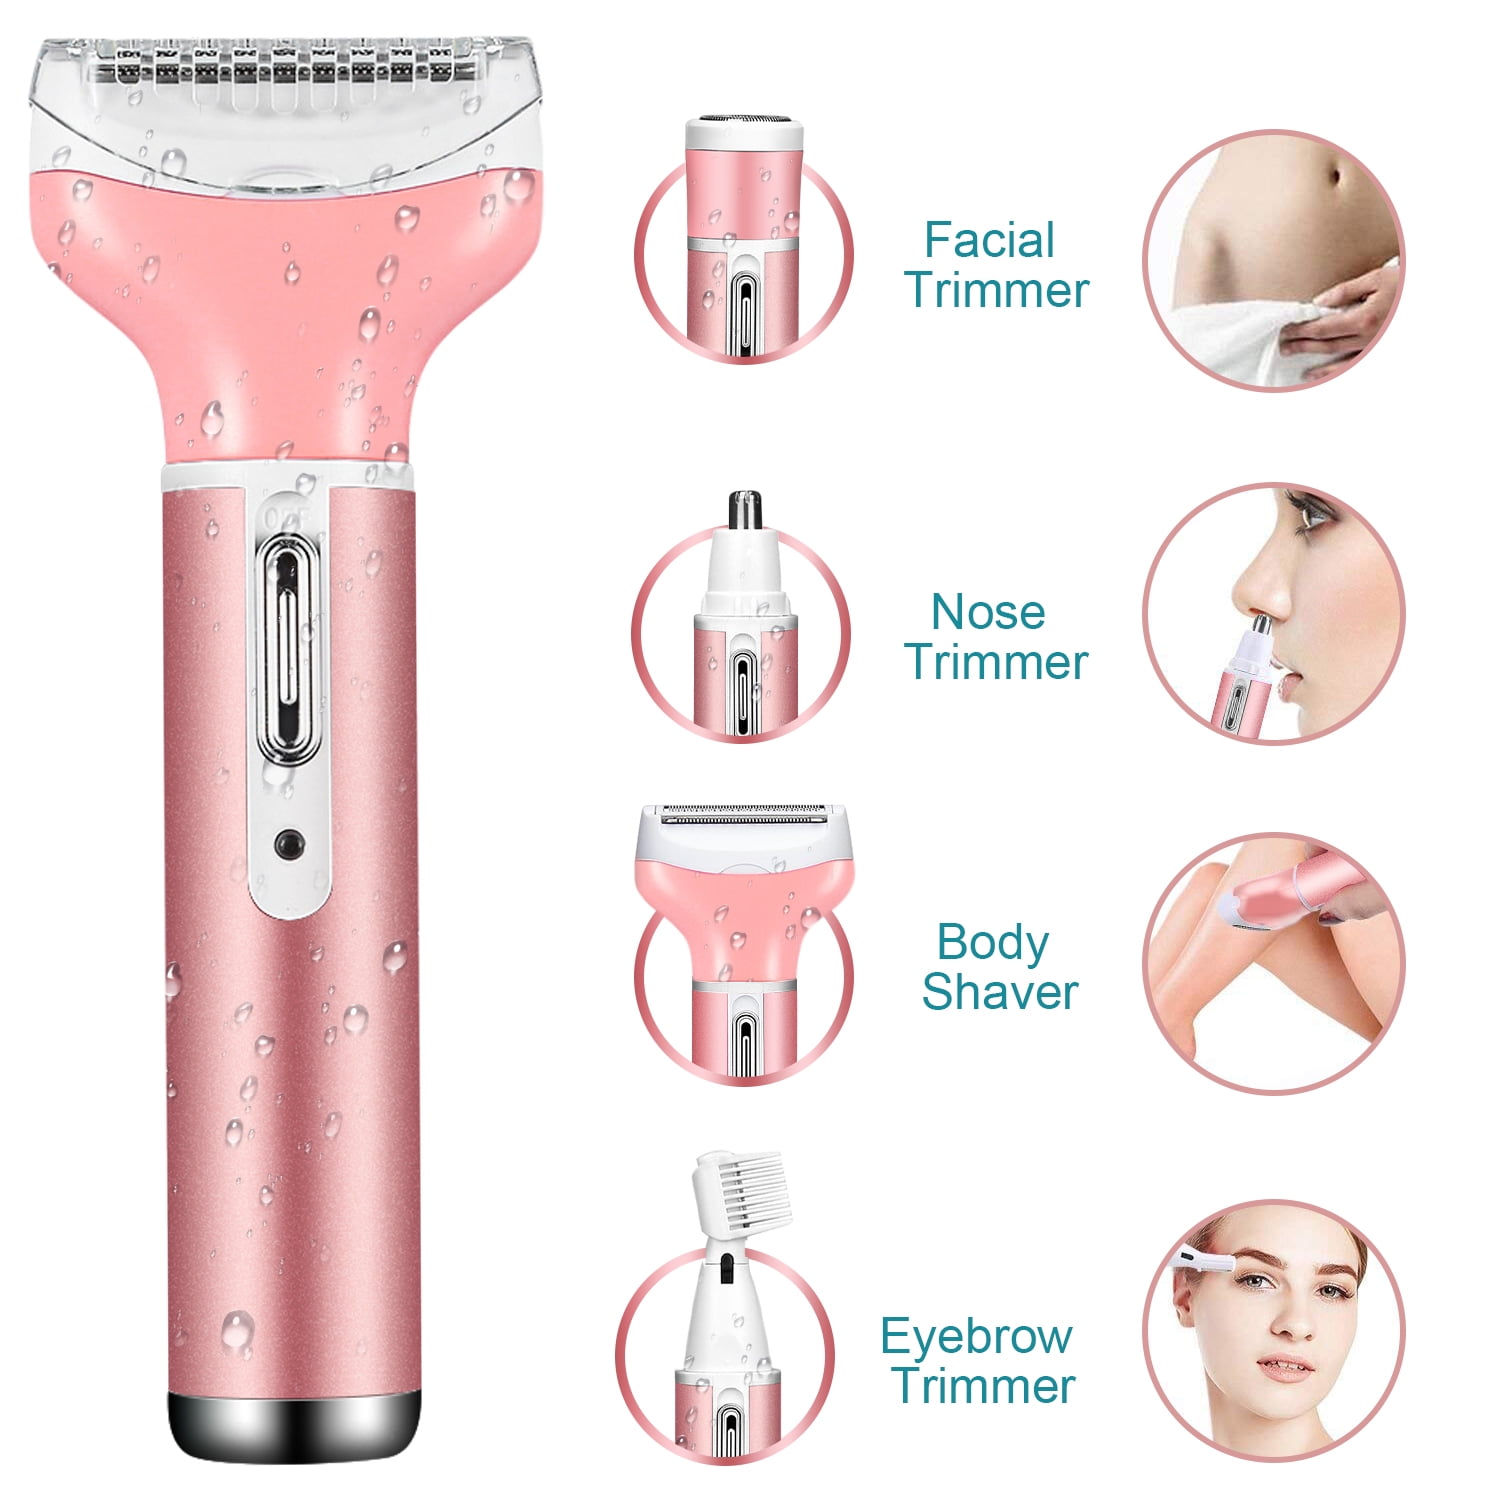 June# Electric Lady Shaver 4 in 1 Women Trimmer USB Rechargeable Bikini and Body Trimmer Facial Hair Clippers Nose Trimmer White 